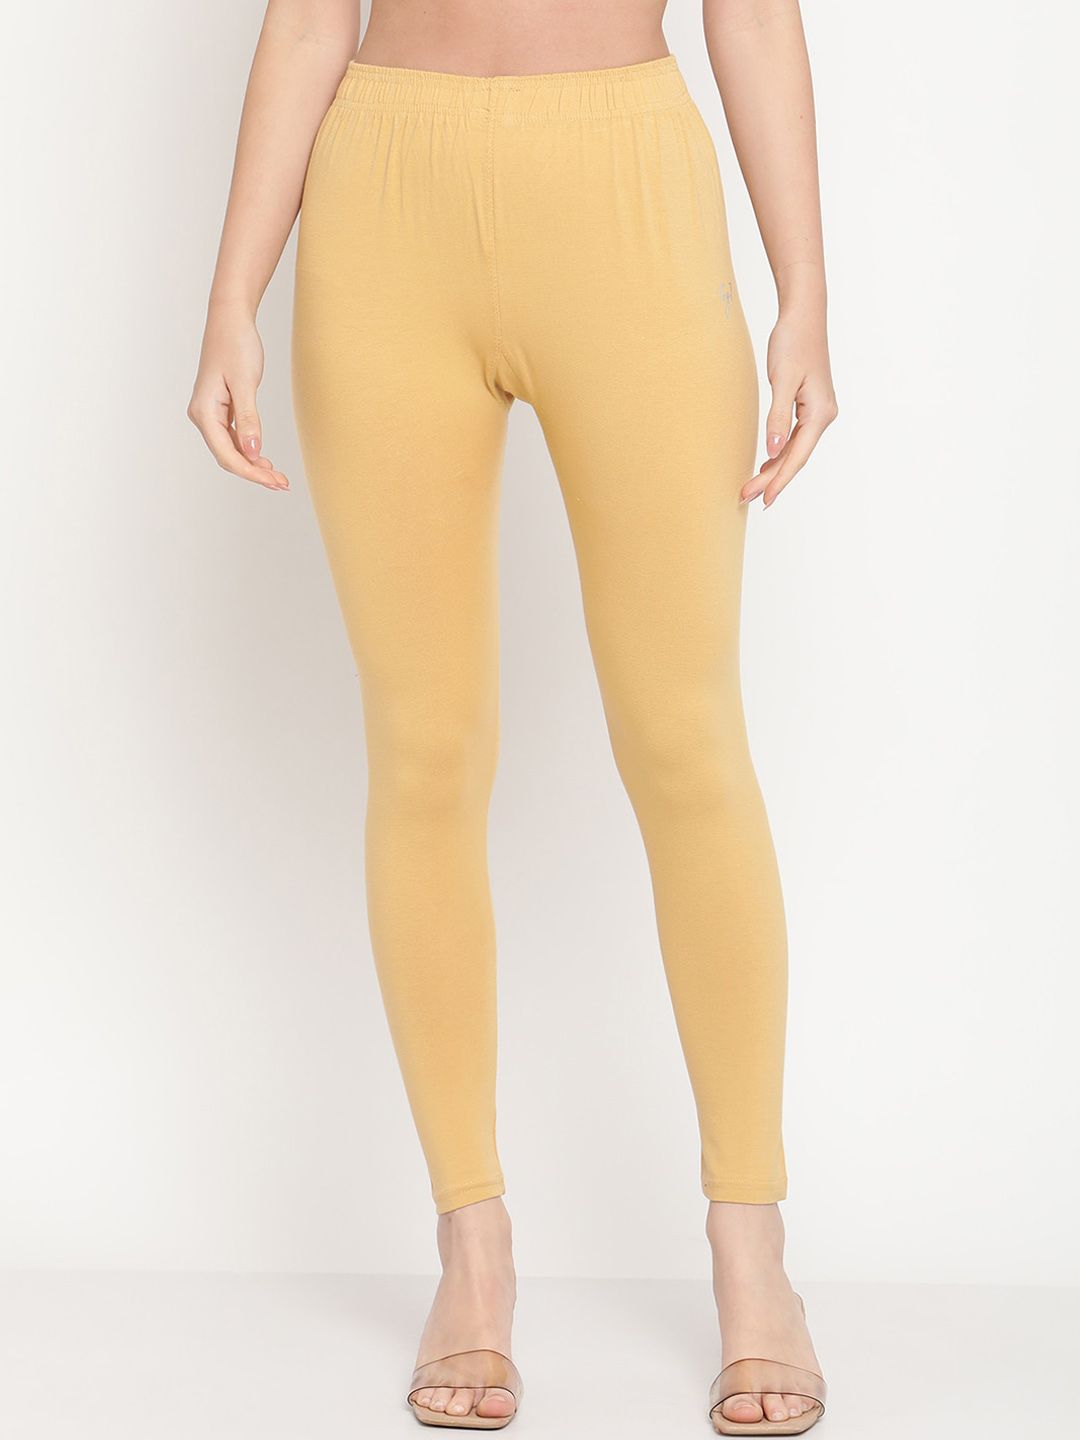 TAG 7 Women Beige Ankle-Length Leggings Price in India